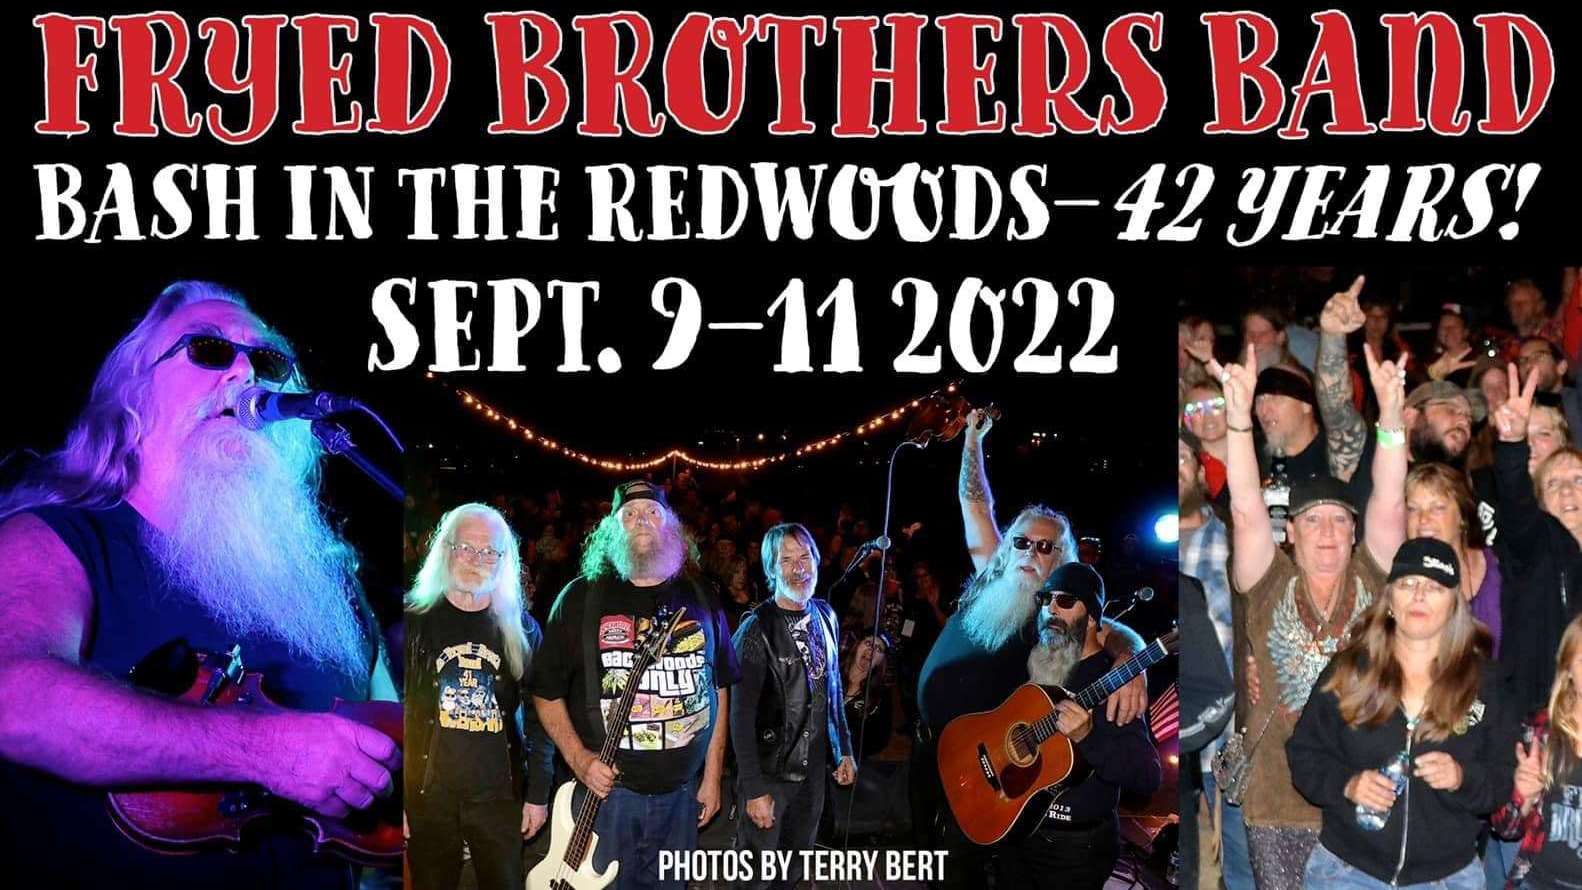 Fryed Brothers Band - Bash in the Redwoods 2022 - 42 Years!